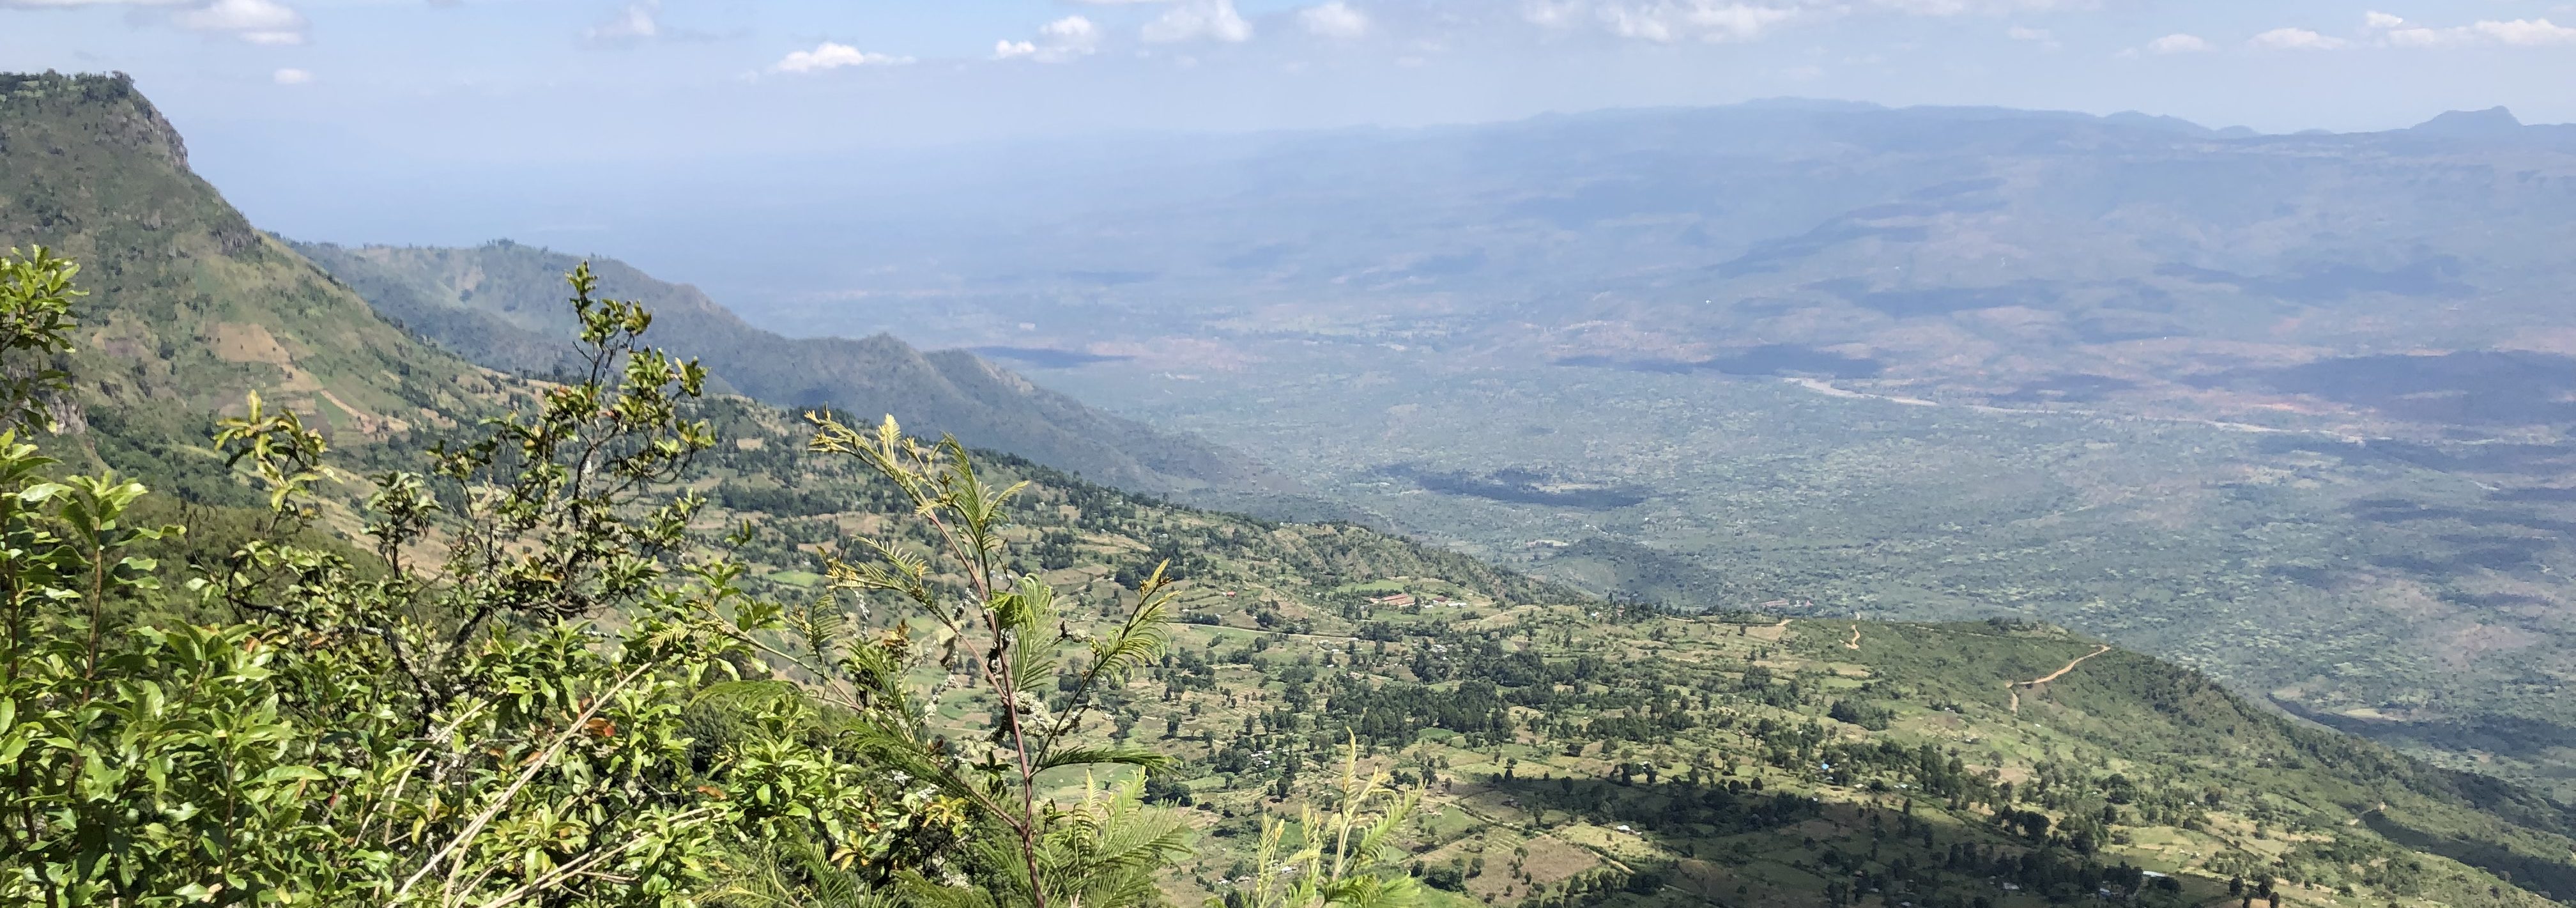 The Rift Valley, Kenya - the area of the study